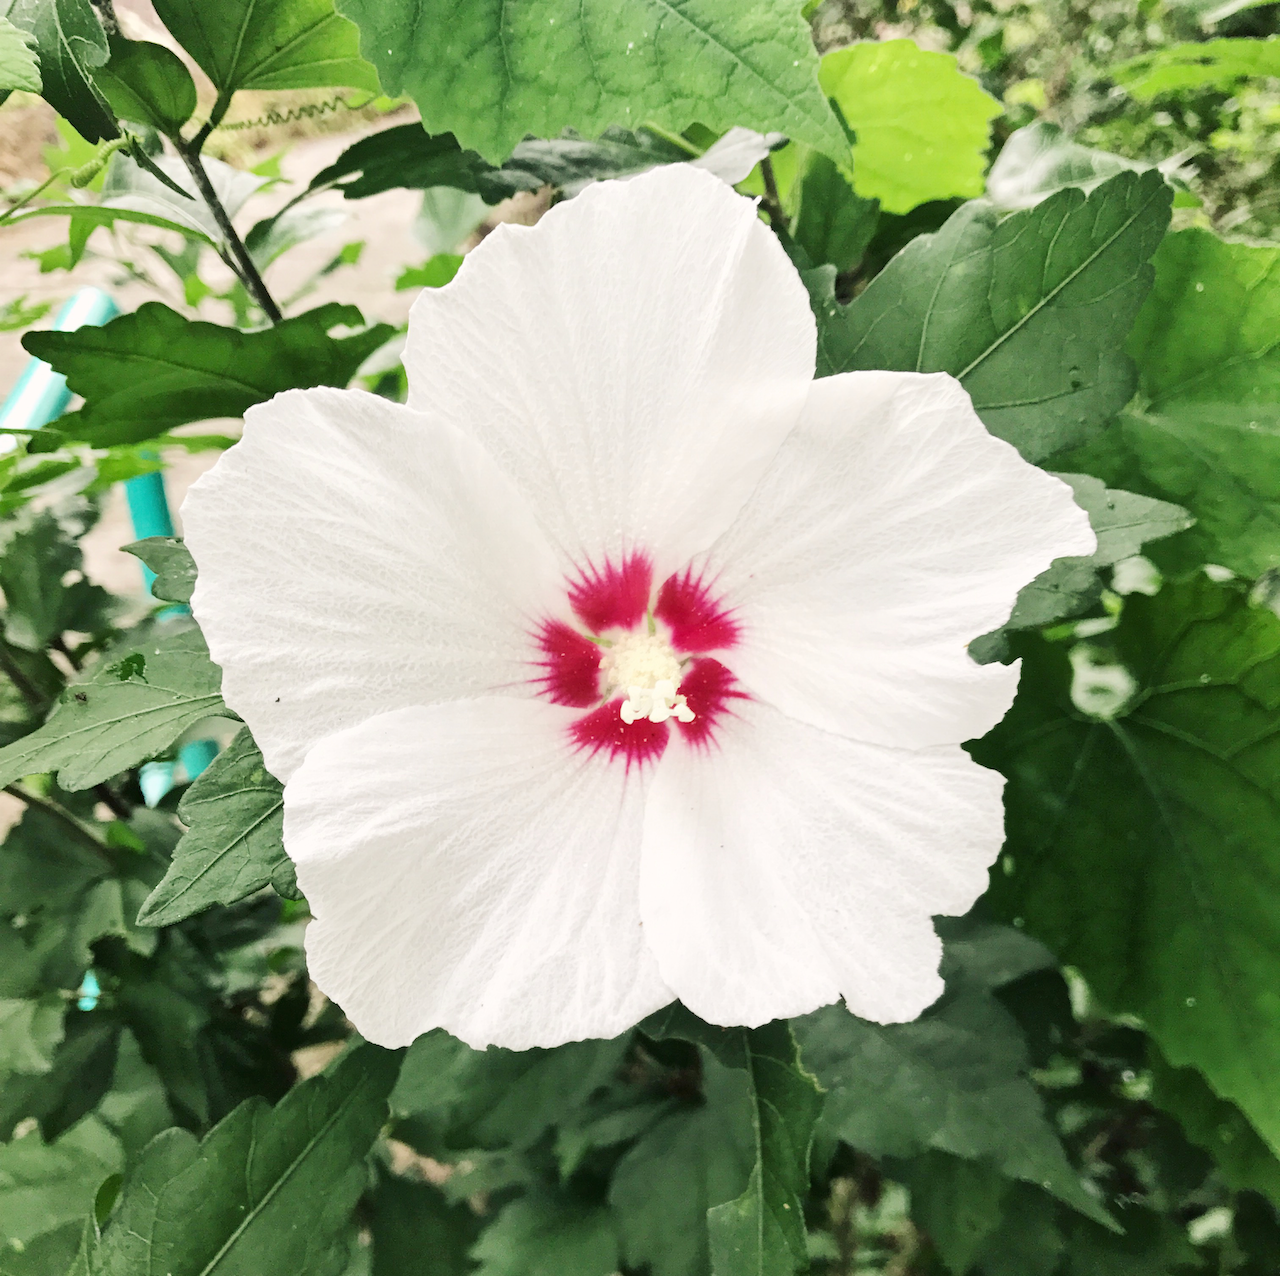 A white, blooming flower.